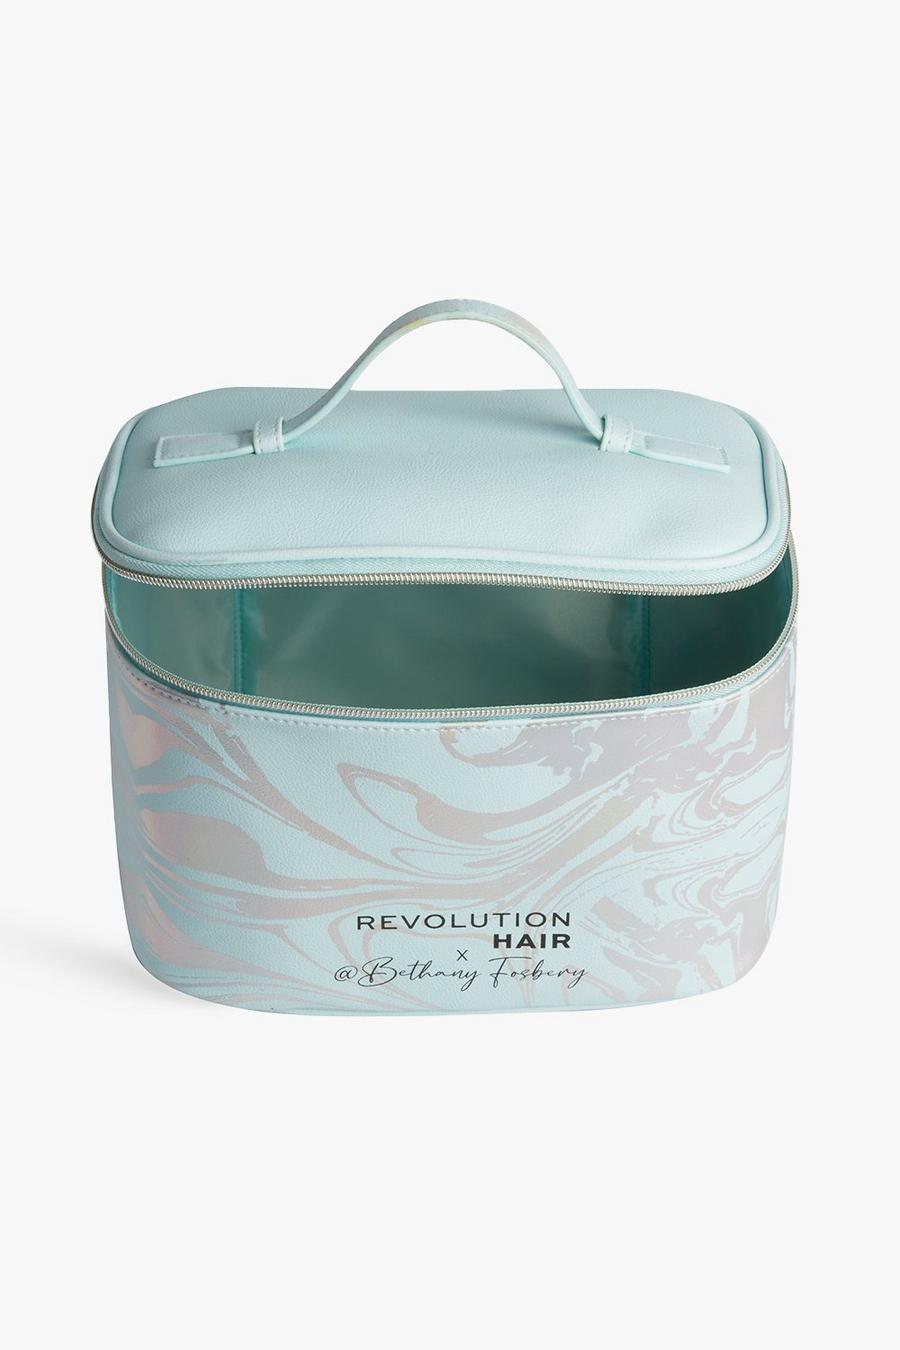 Blue Revolution Haircare Bethany Fosbery Vanity Case  image number 1